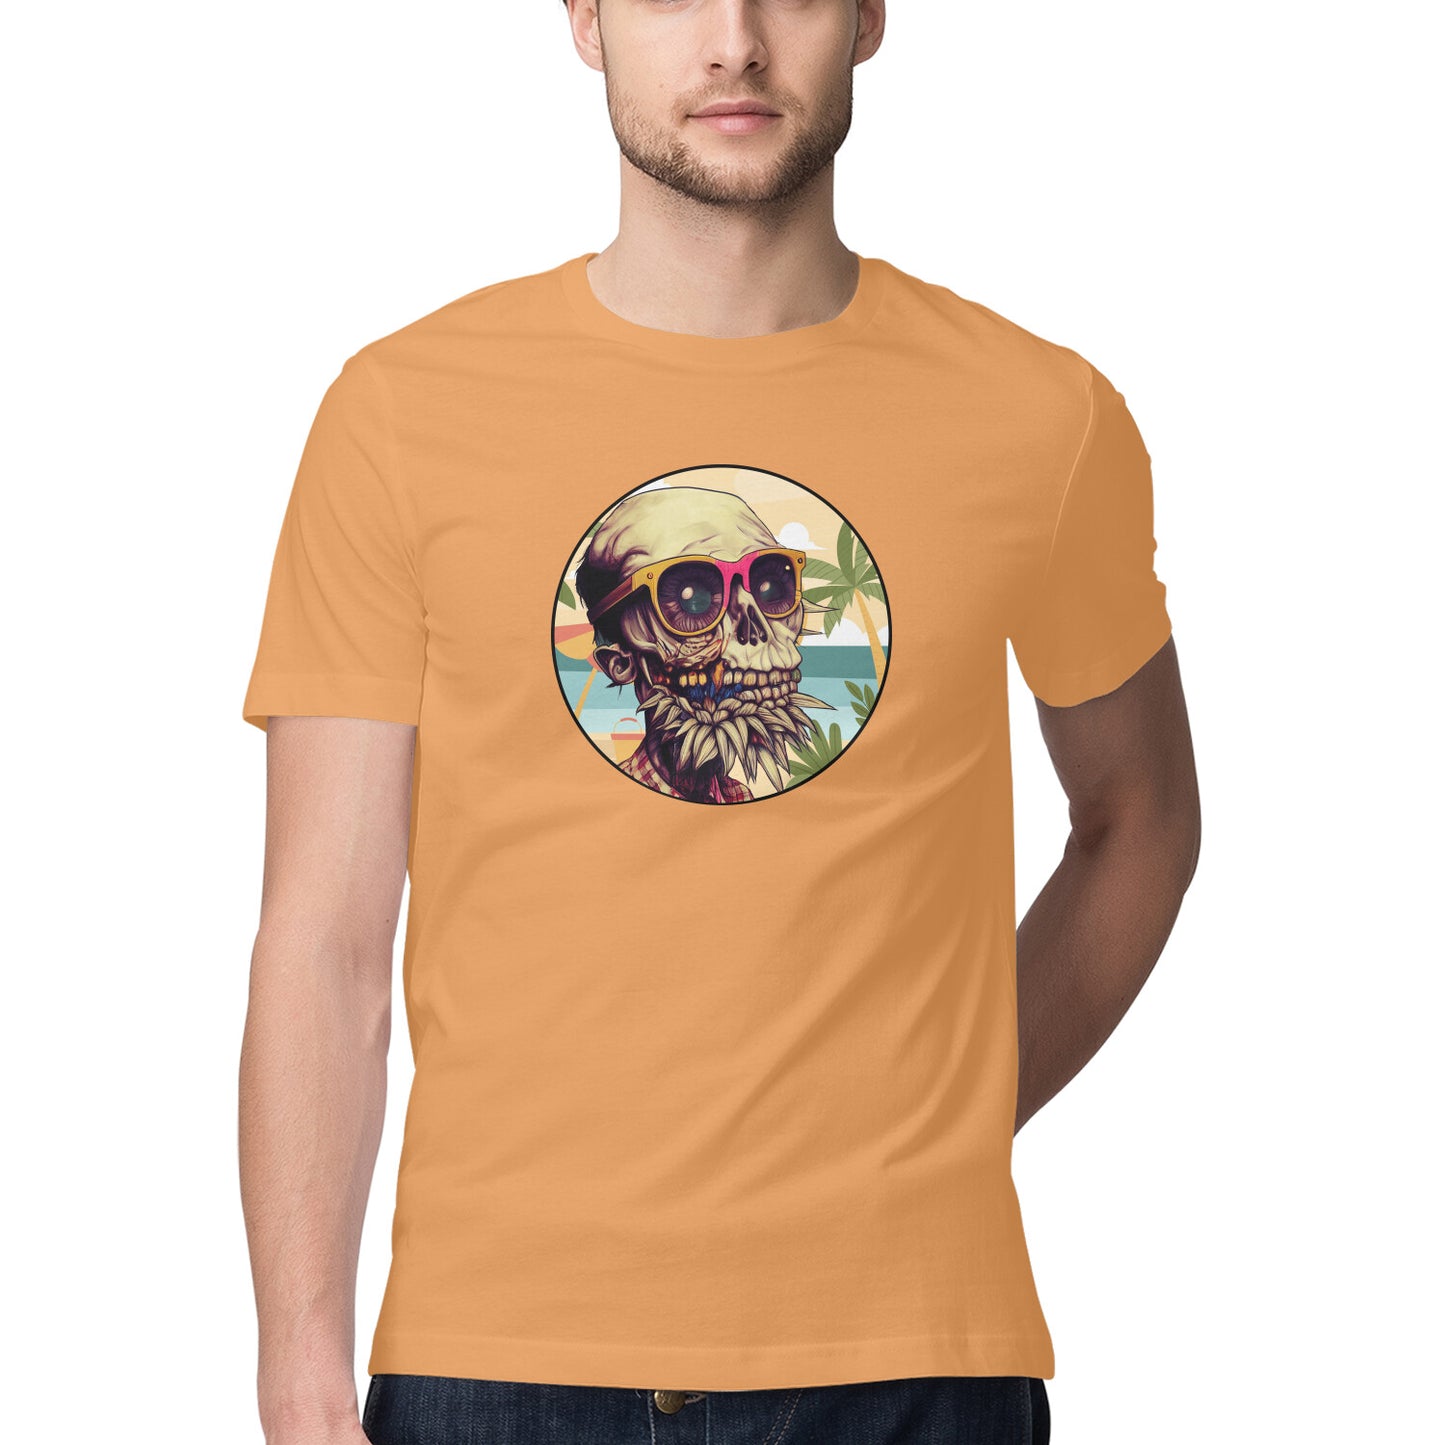 Zombies and monsters Design 2 Printed Graphic T-Shirt